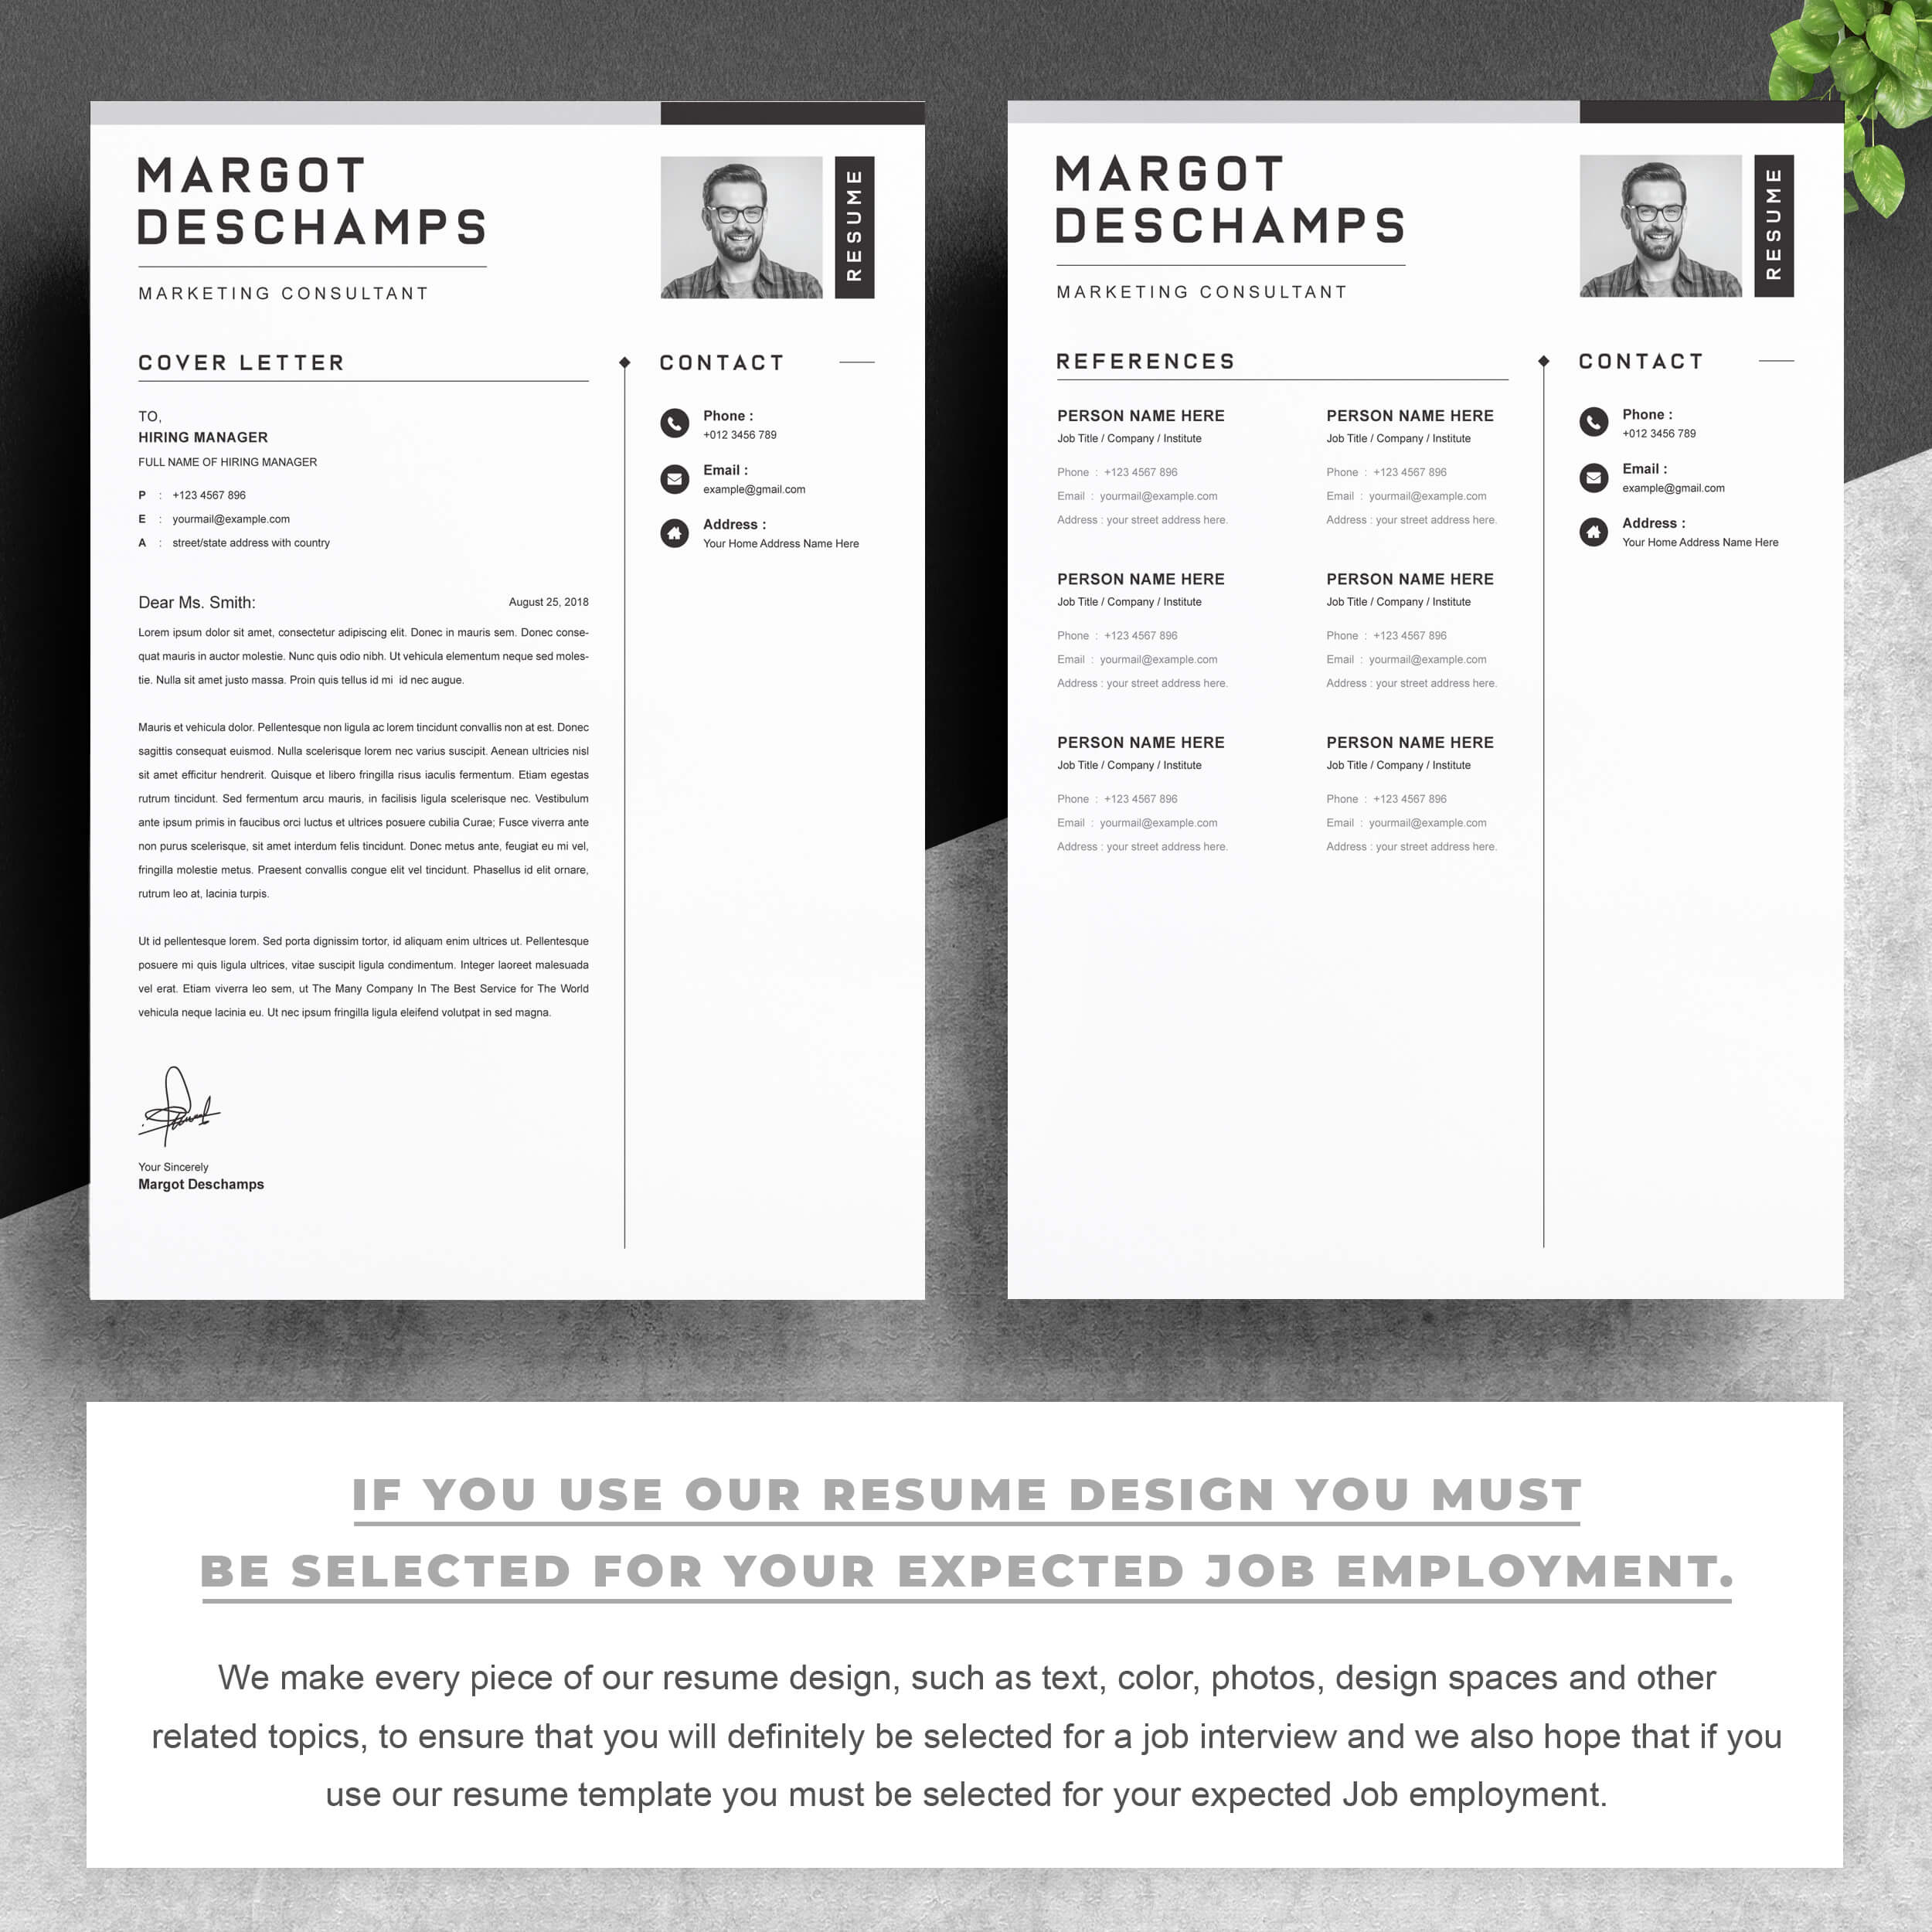 03 2 pages free resume design template copy 2 557